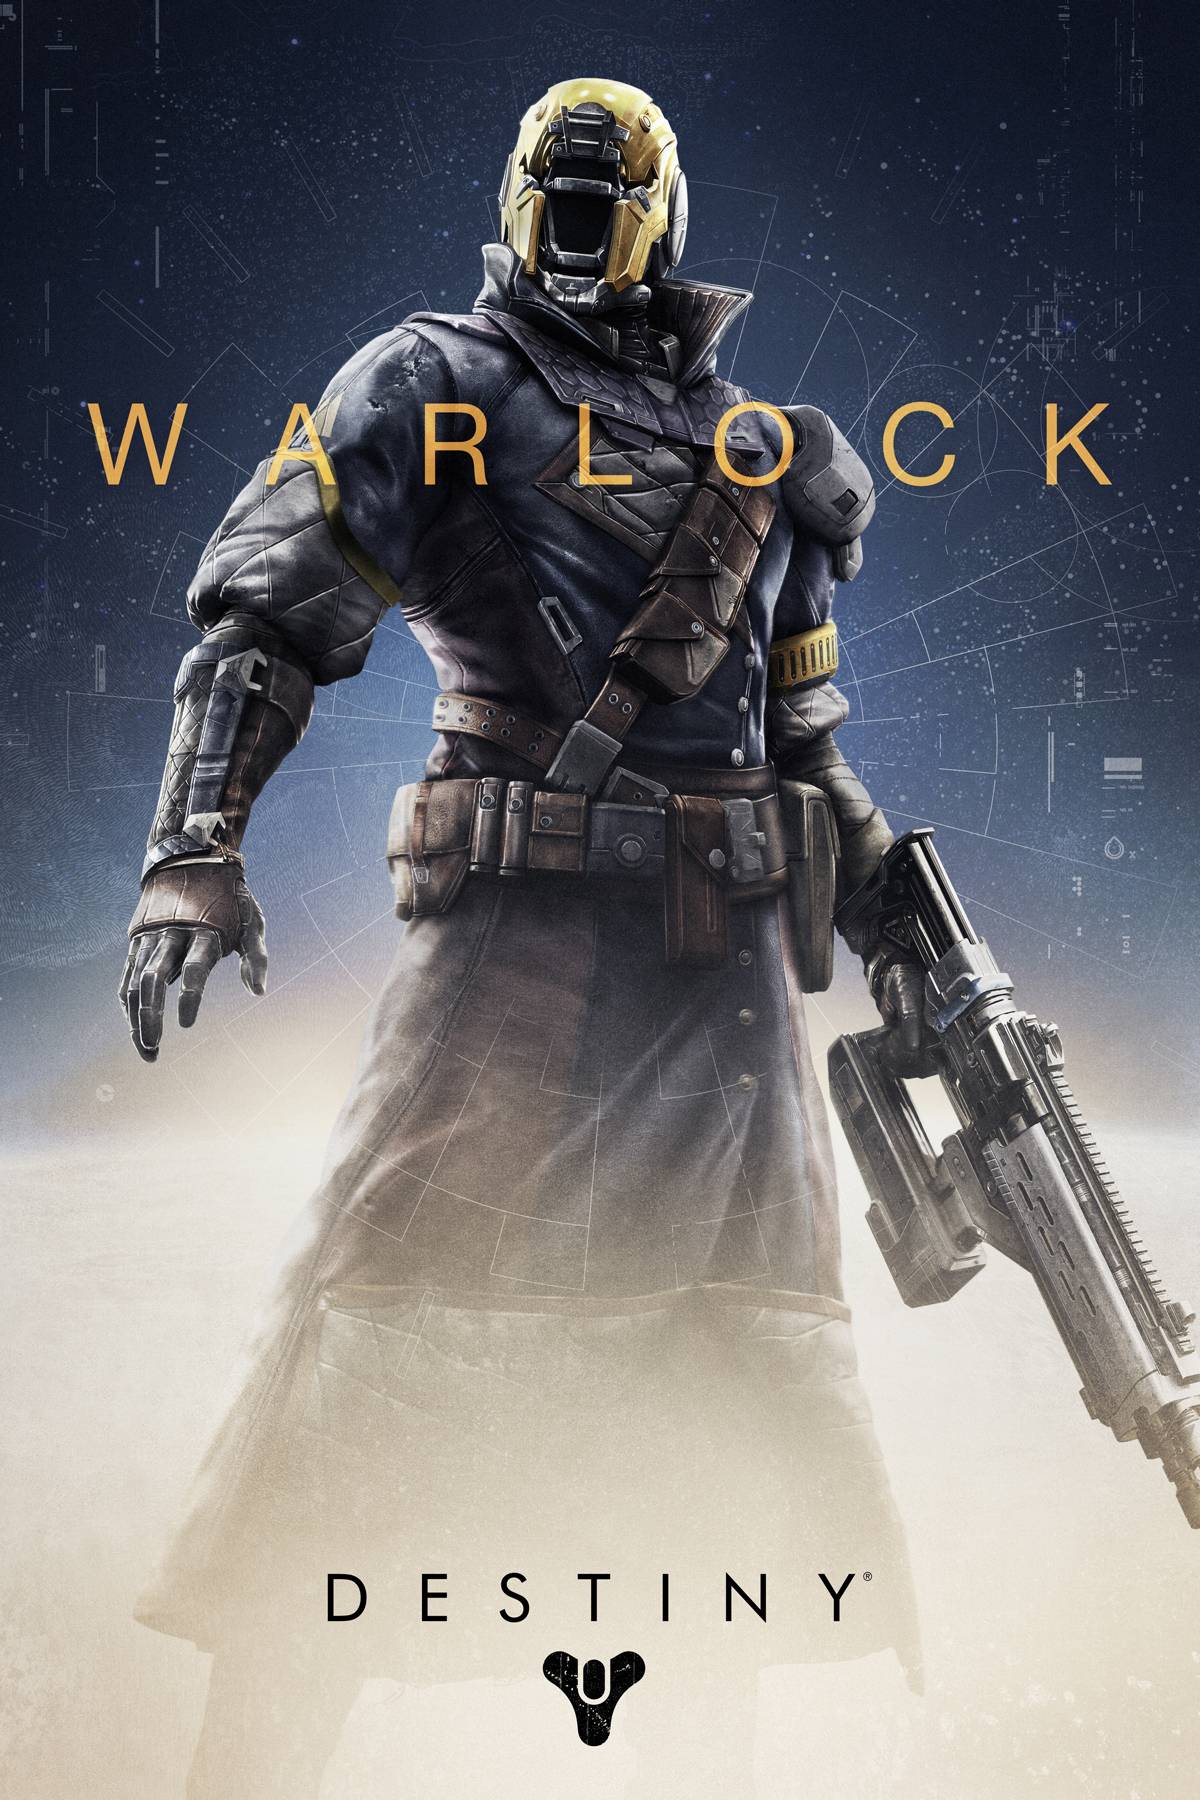 Awesome IPhoneandroid Destiny Wallpaper Warlock DestinyTheGame 1200x1800